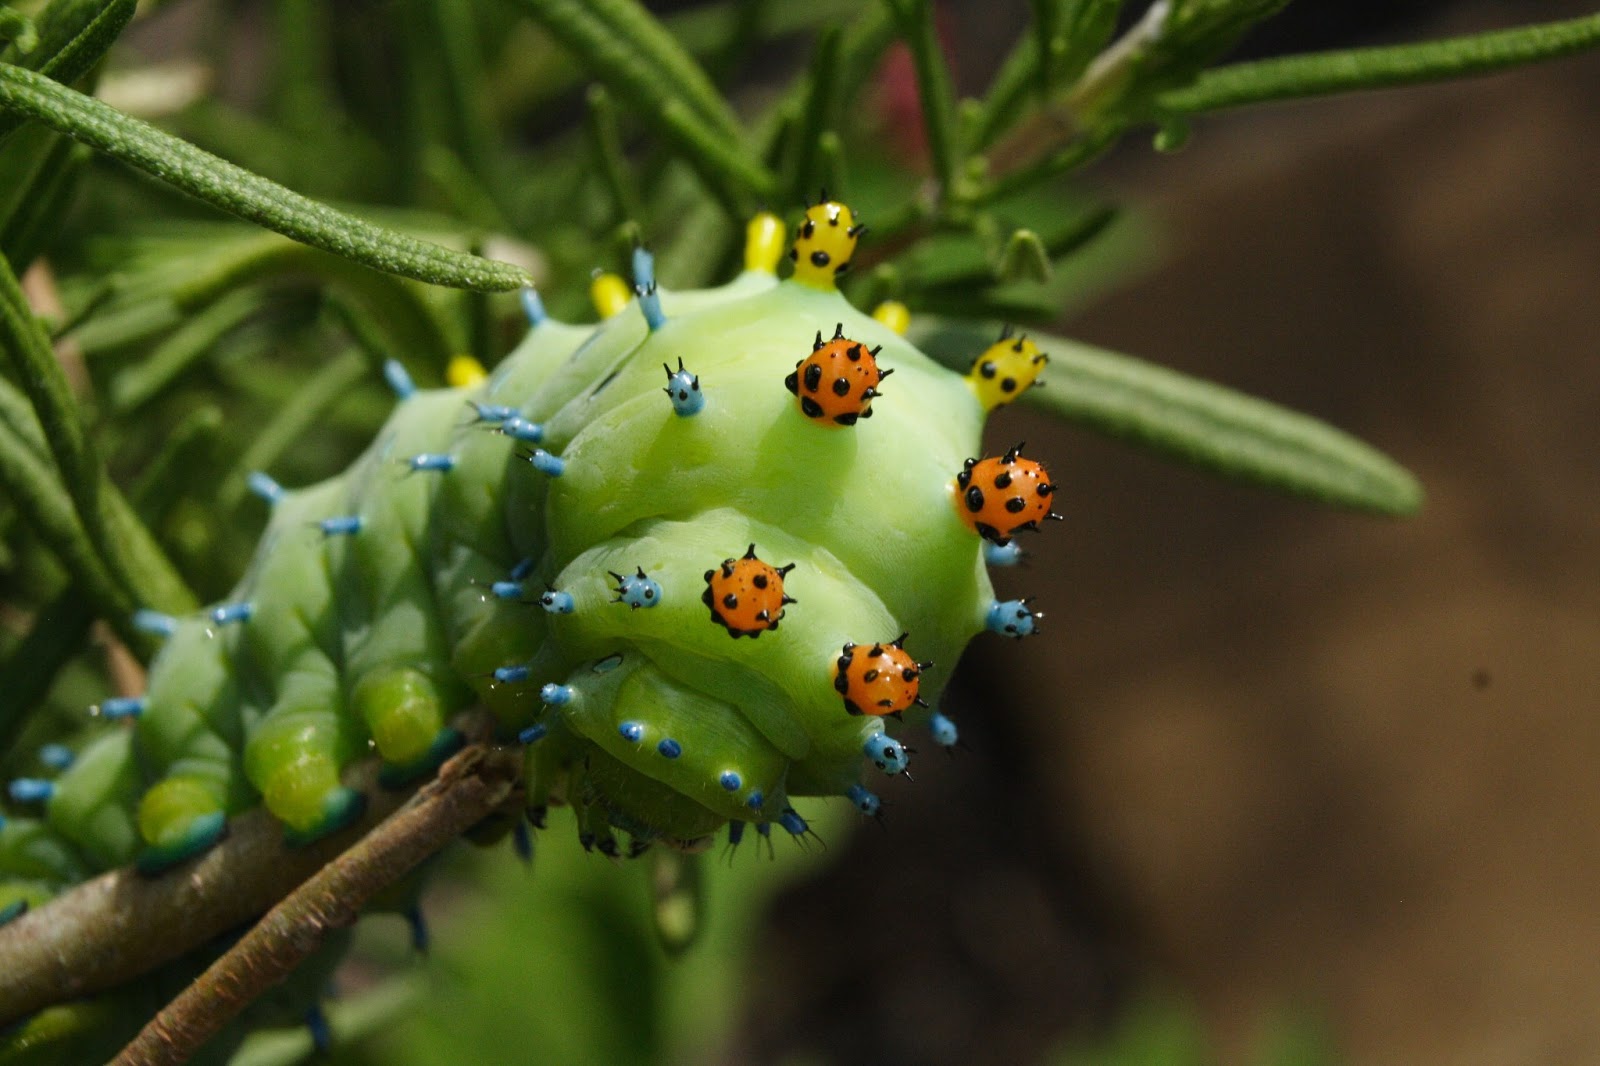 ... County (PA) Master Gardeners: What is THAT? Cecropia Moth Caterpillar